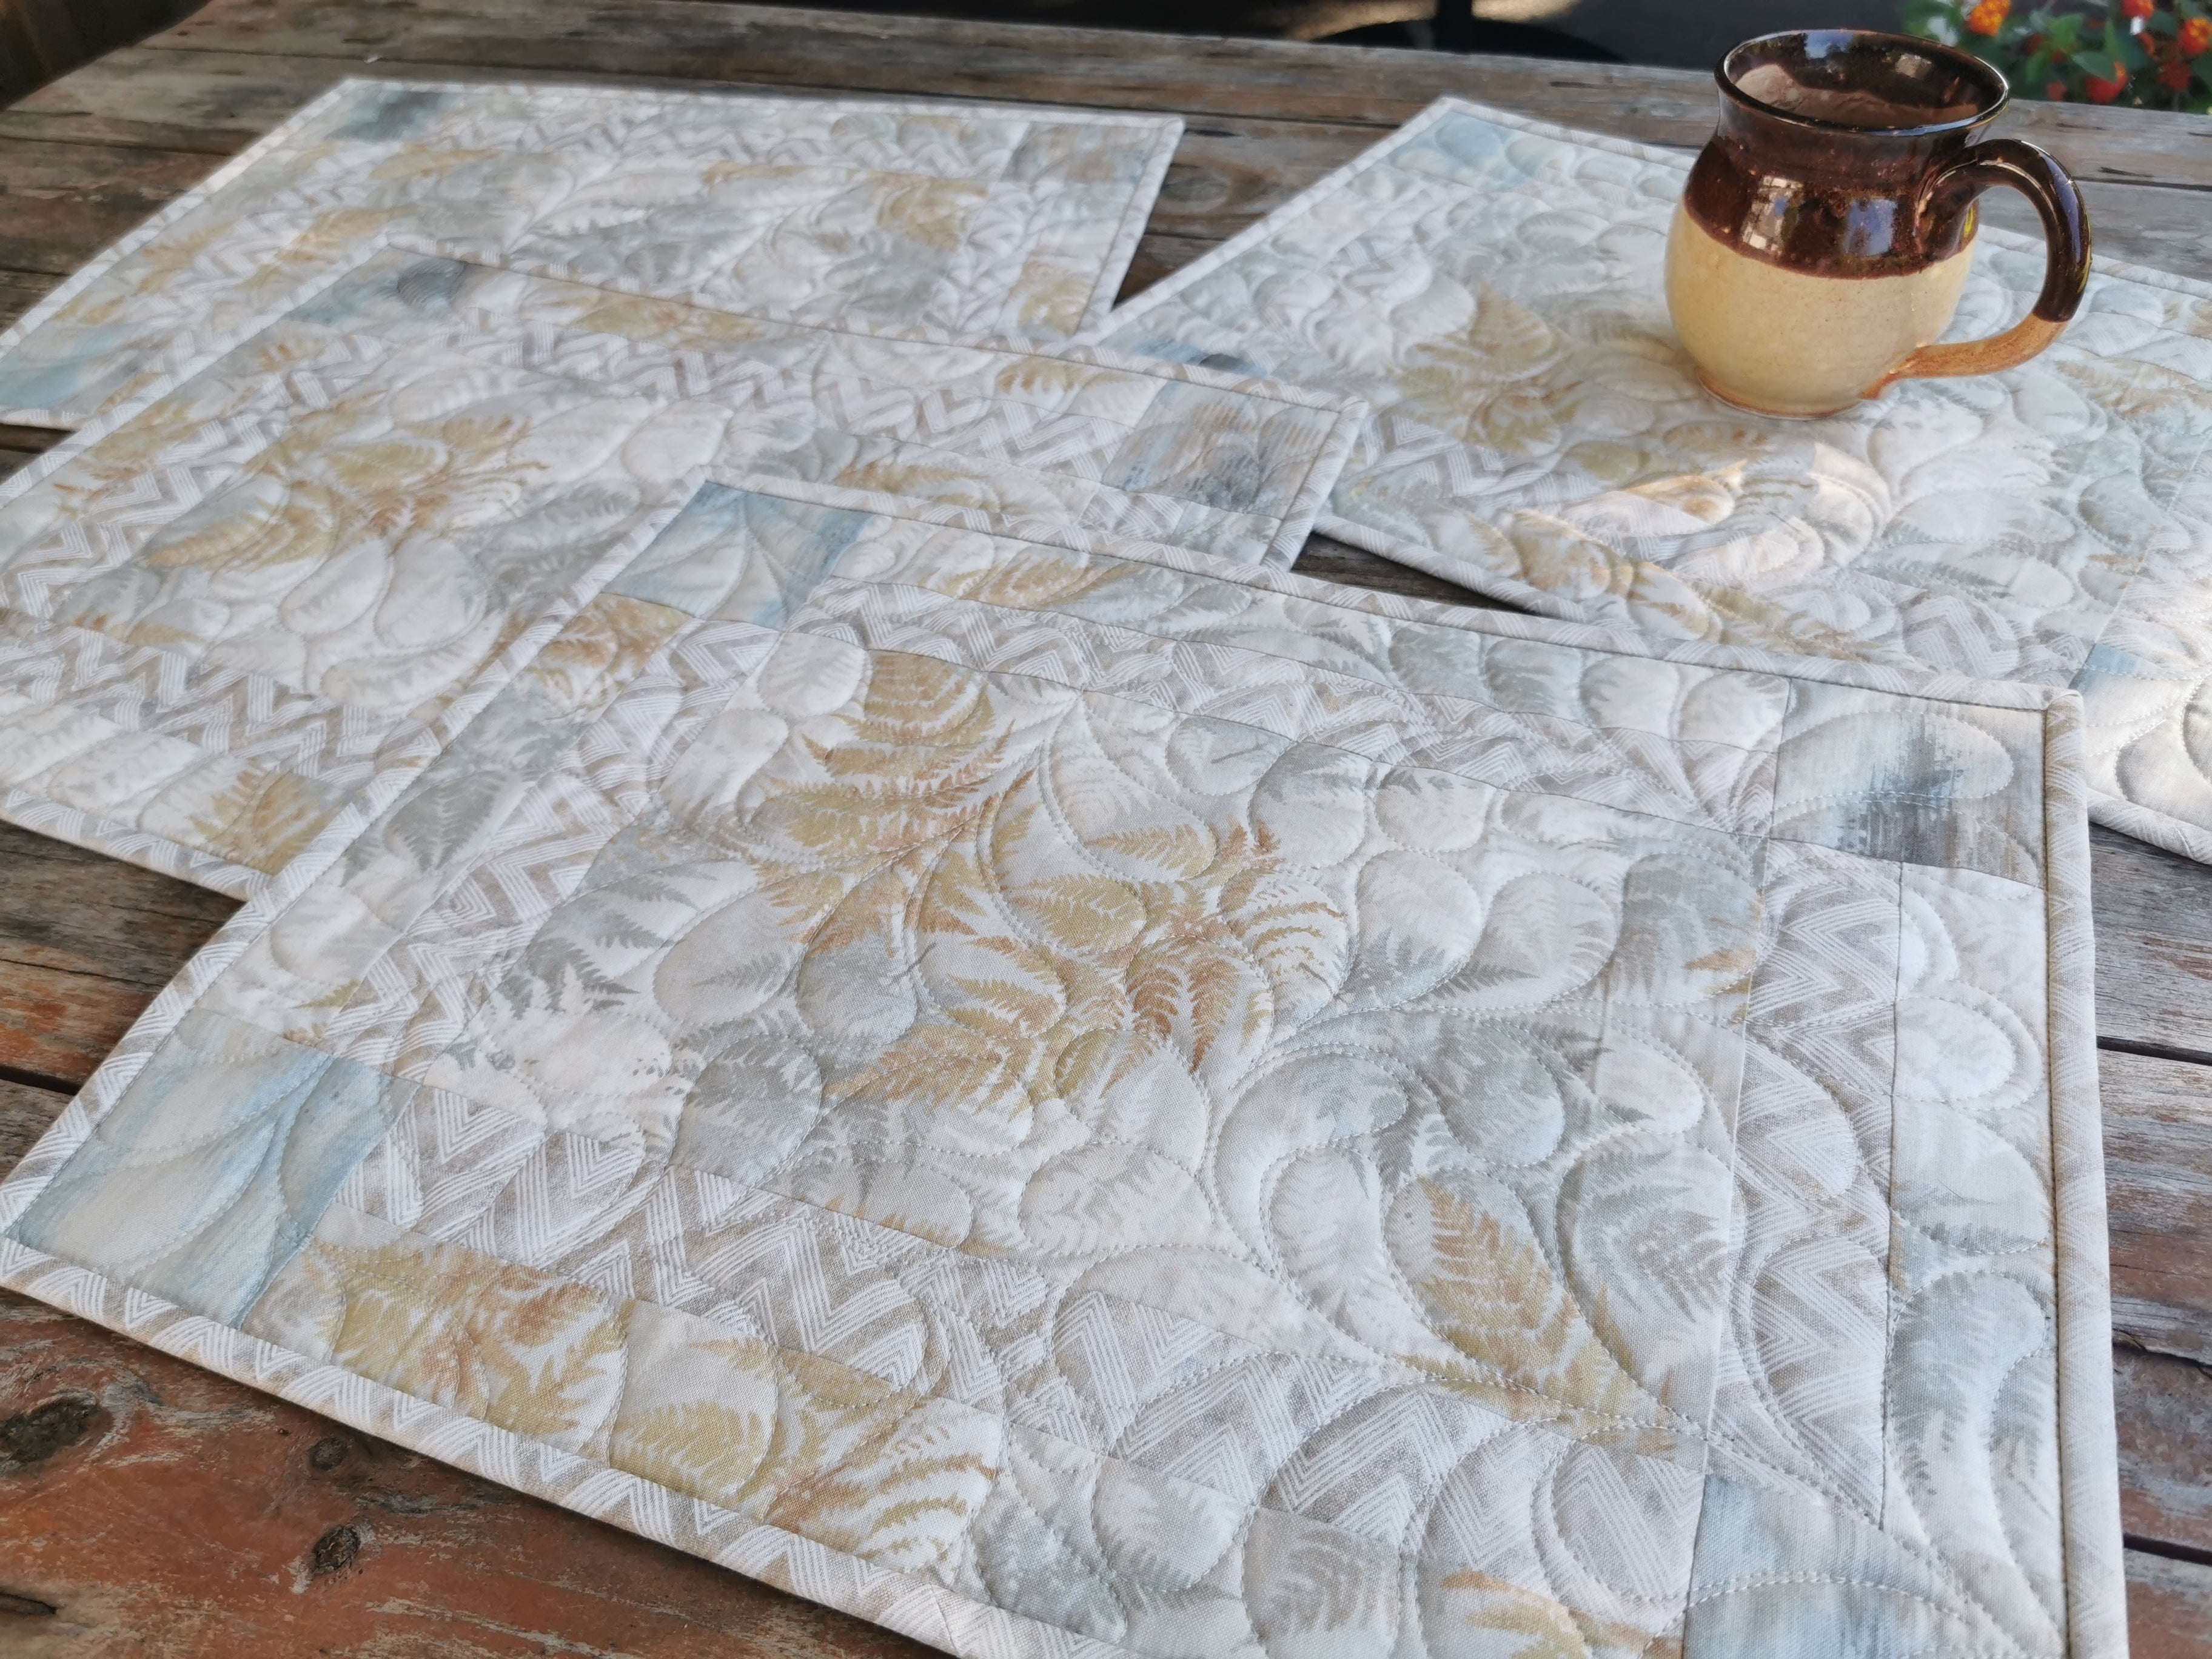 Side angle view of the four quilted placemats. The muted abstract fern pattern features neutral beige and slate blue.